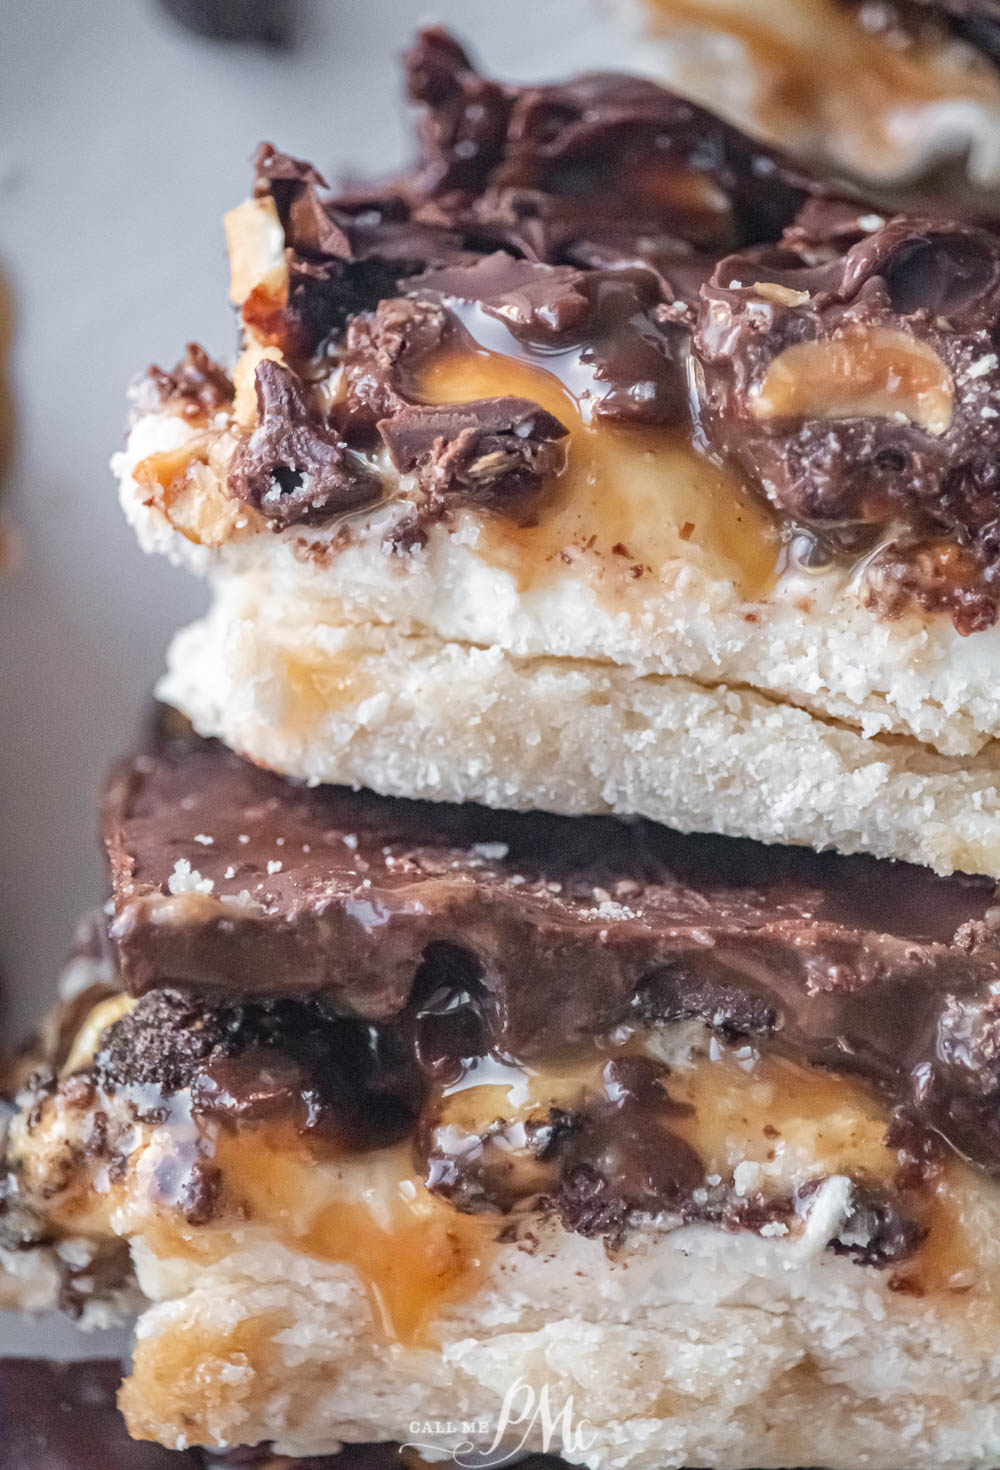 sweet dessert bars with peanuts and nougat on a cookie crust.